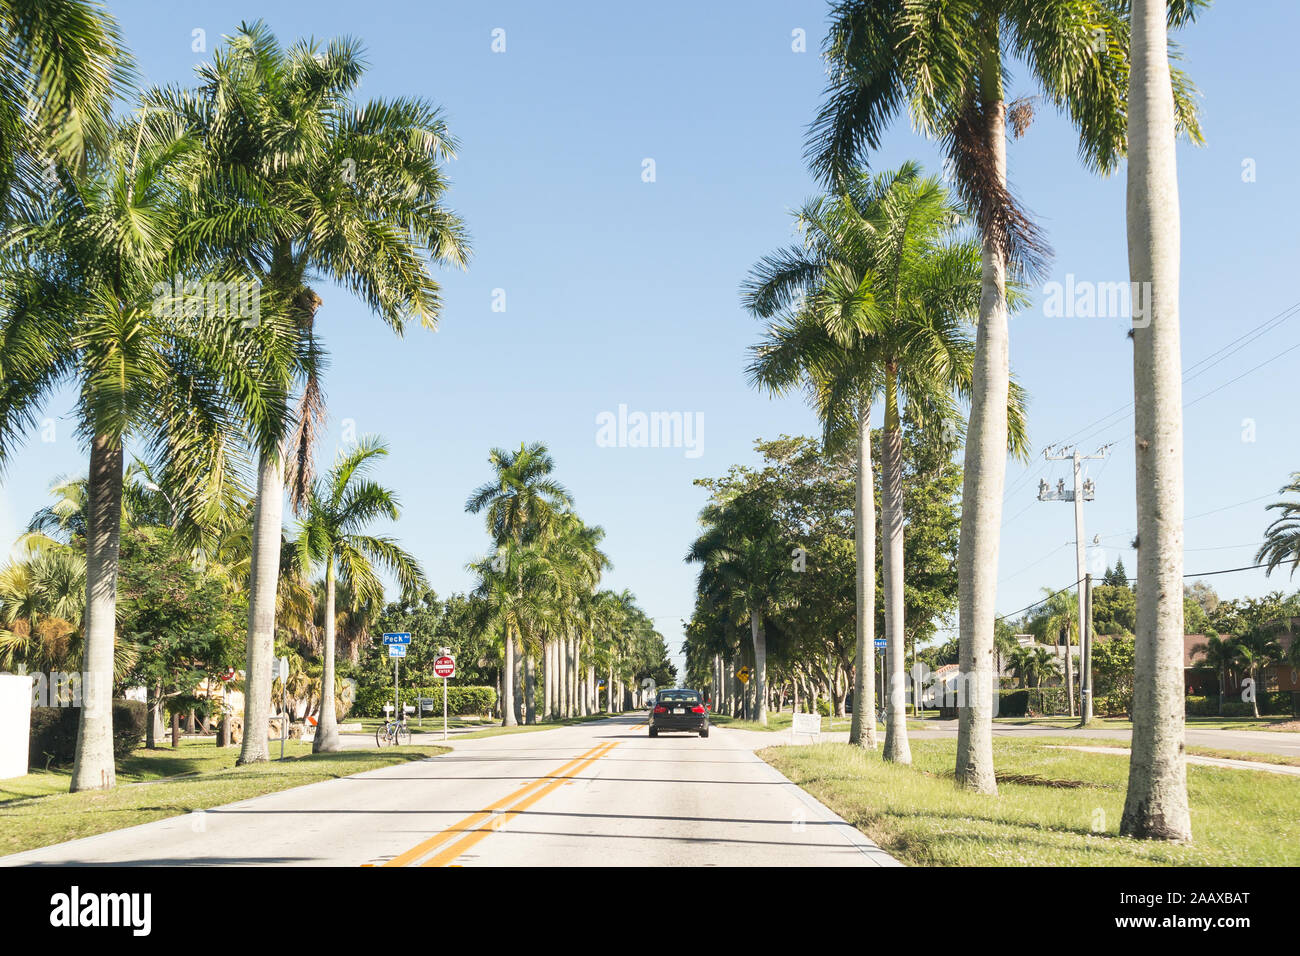 Traffic and palm trees on McGregor Boulevard in Fort Myers, Florida, USA Stock Photo